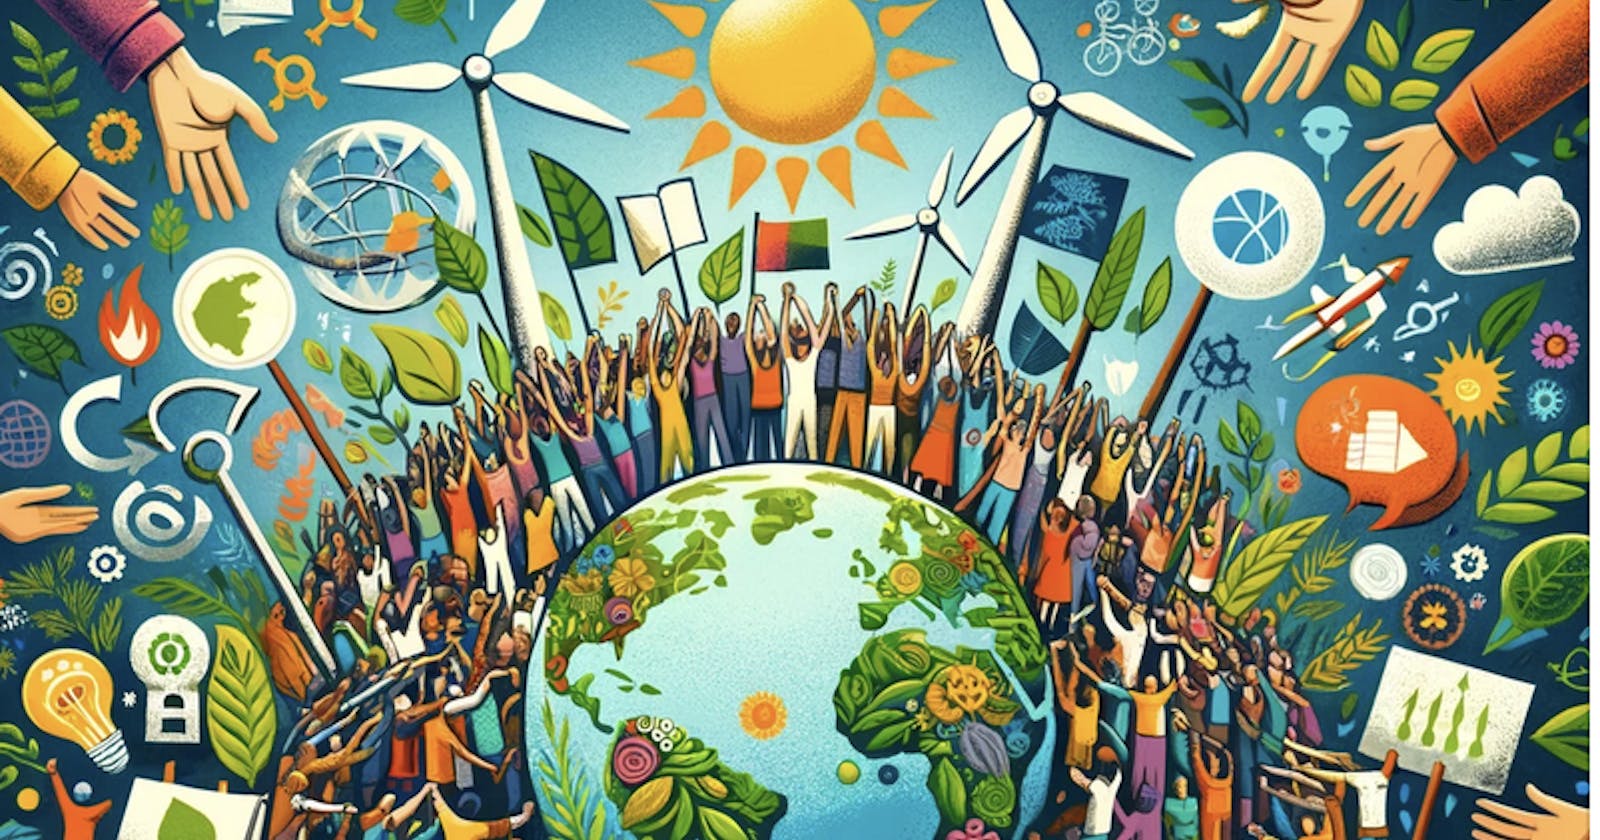 Uniting Voices for the Earth